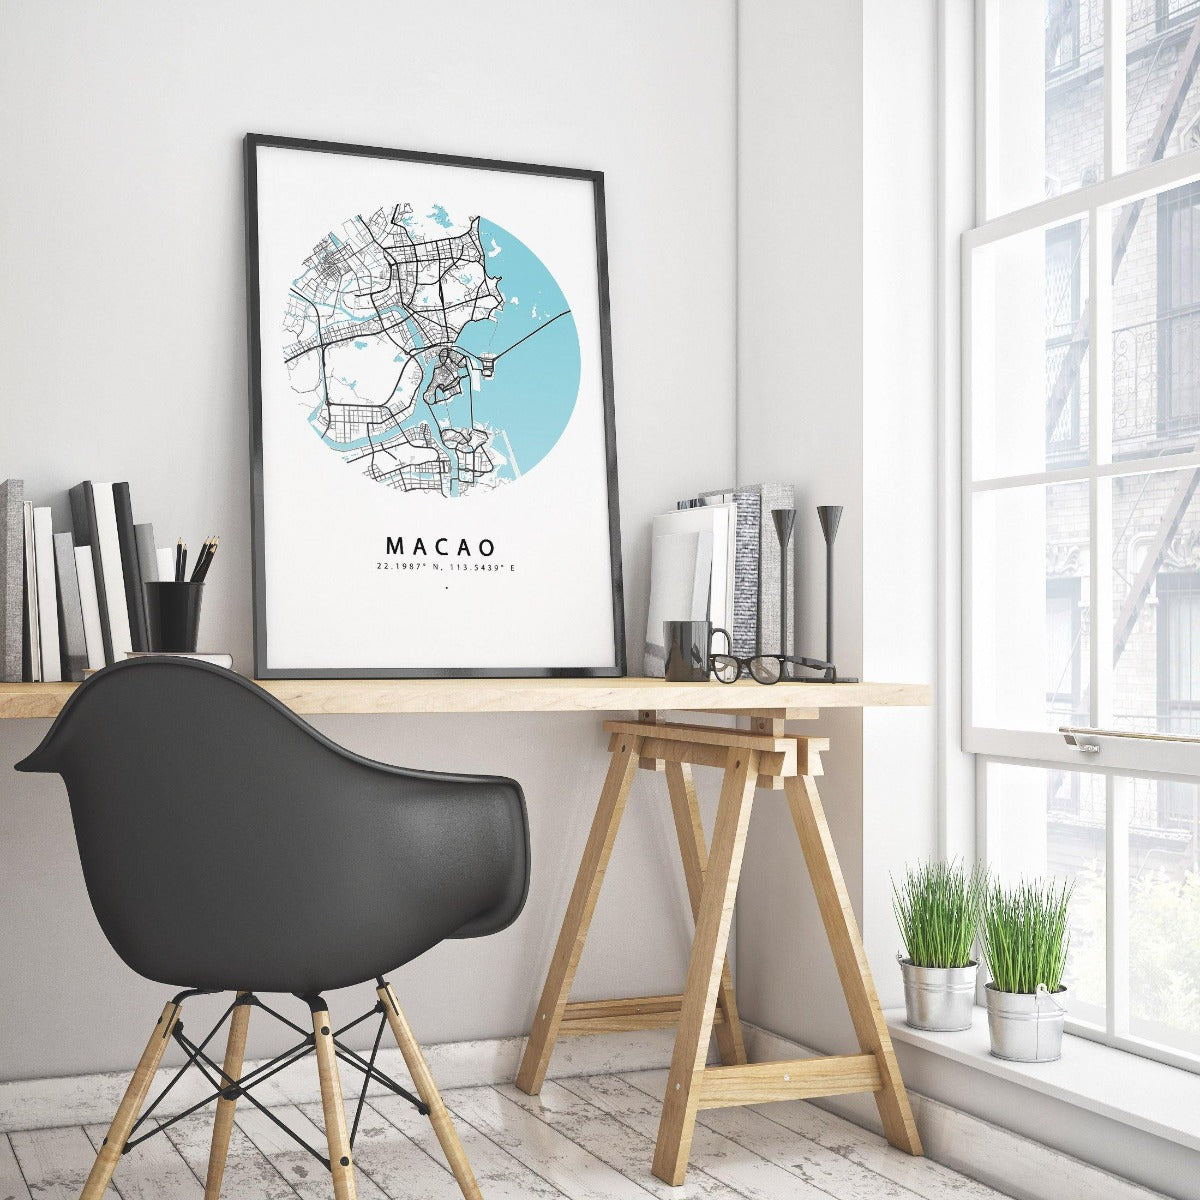 This Macao City Street Map Print is perfect for those who want to add a touch of wanderlust to their home. The map print features all the major streets and landmarks of Macao City, making it the perfect addition to your home or office. The map is printed on high-quality paper, making it a great gift for any map lover.